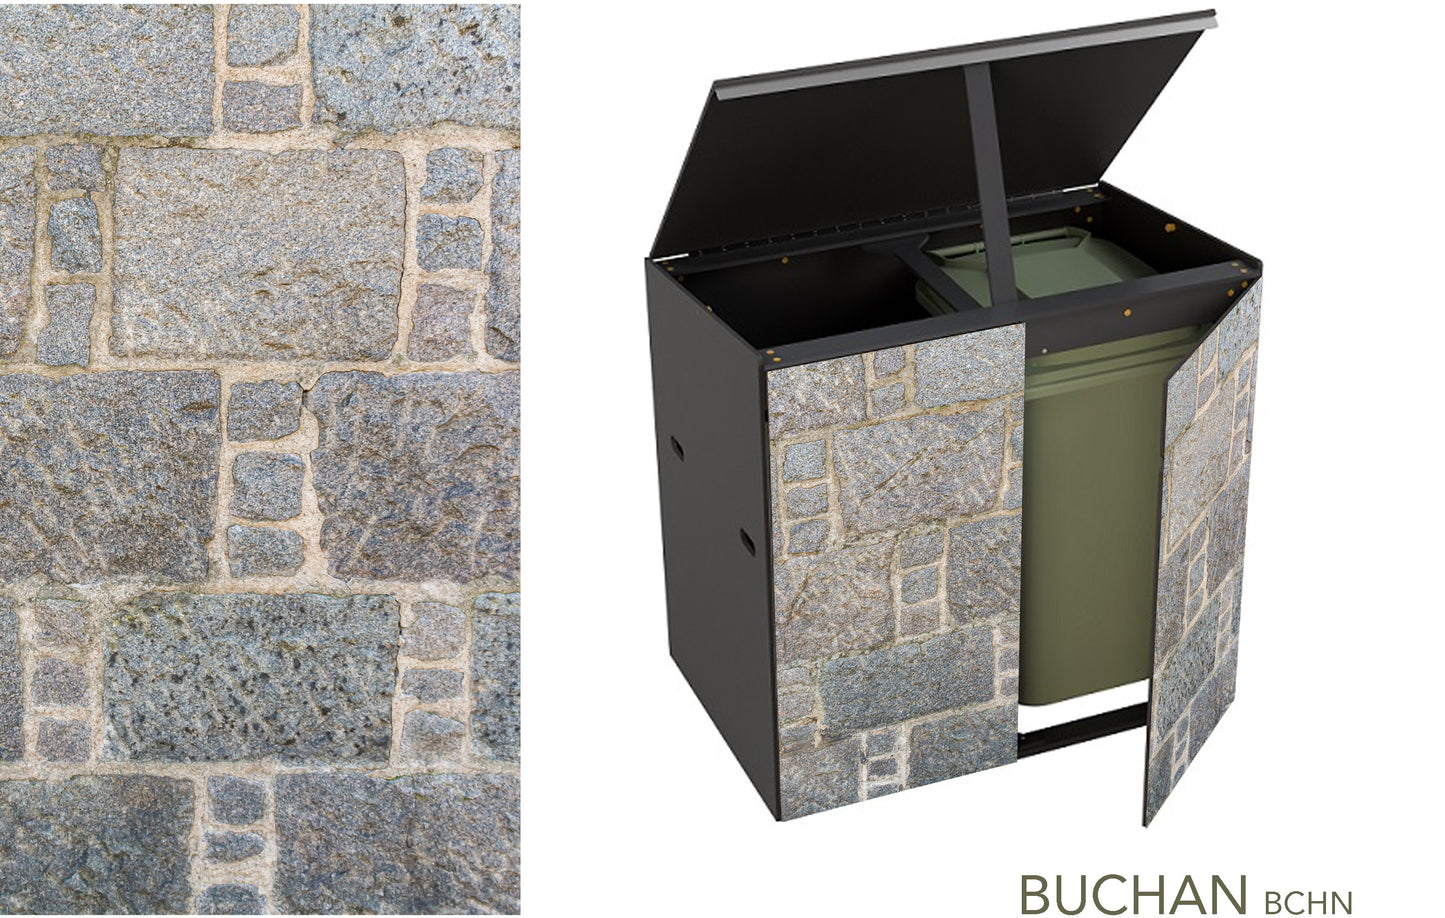 The Buchan binstore for 2 wheelie bins but this time the lid is propped open and one door ajar to reveal a green wheelie bin inside.